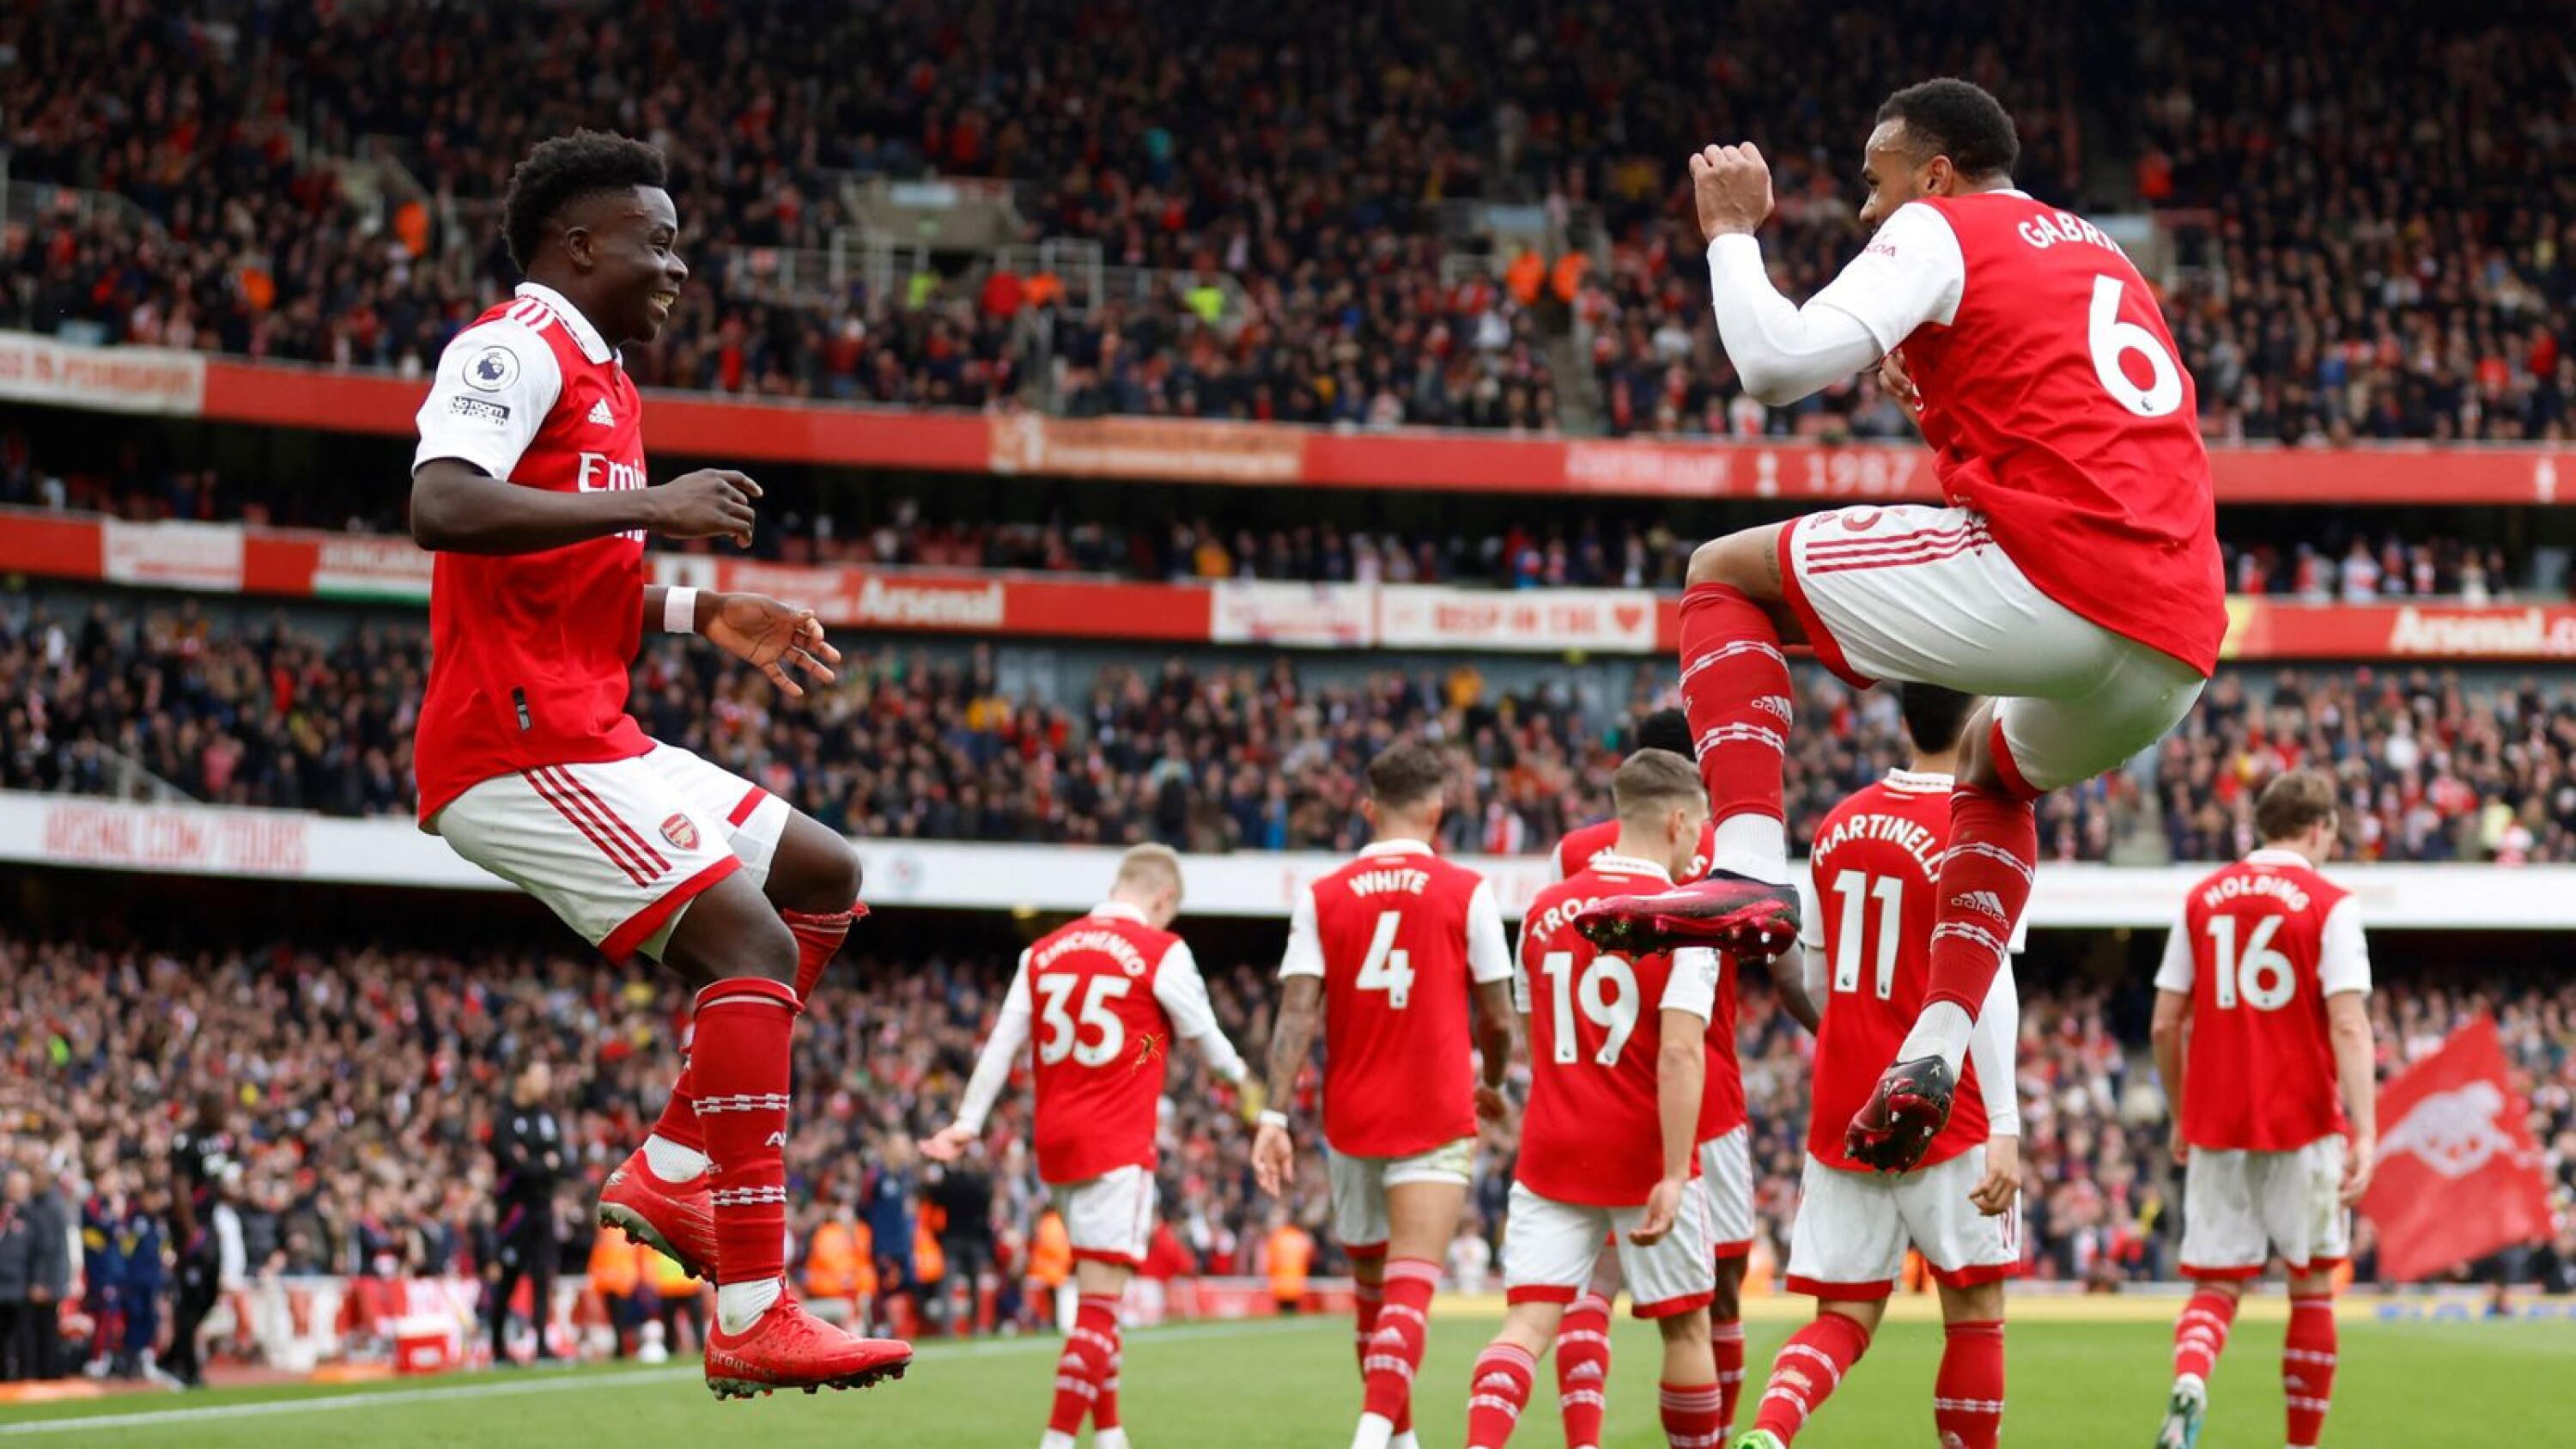 Arsenal's Bukayo Saka celebrates with his teammates after scoring their second goal during their Premier League clash against Crystal Palace at the Emirates Stadium in London on Sunday